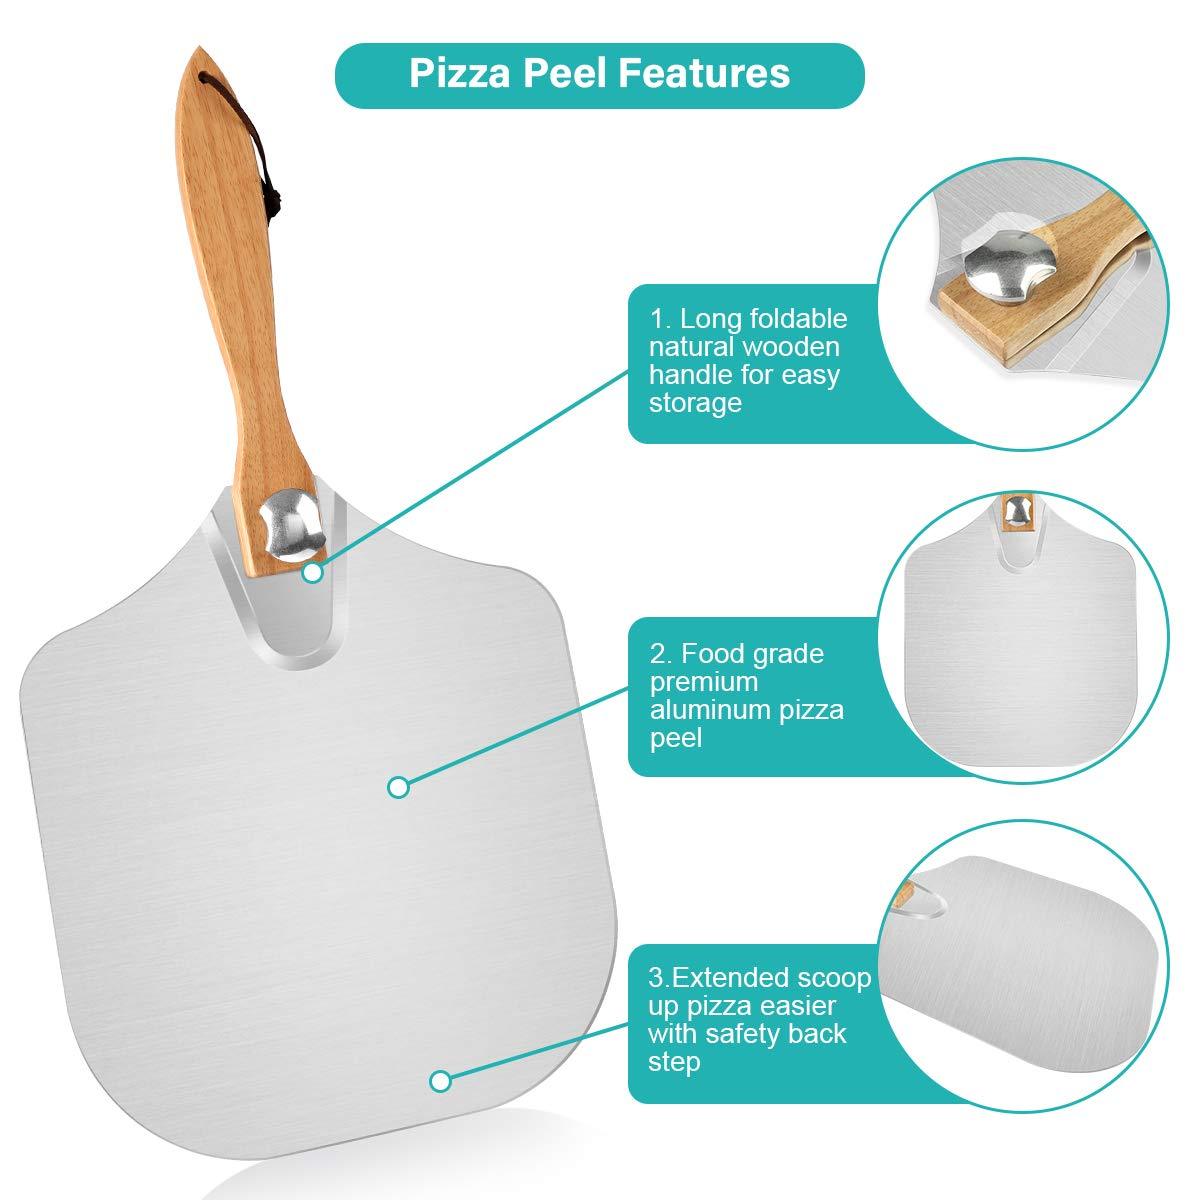 7PCS Foldable Pizza Peel Pizza Pan Set,12" x 14" Aluminum Metal Pizza Paddle with Wooden Handle, Rocker Cutter, Server Set, Baking Oven Mitts, Oil Brushes, Homemade Pizza Oven Accessories - CookCave